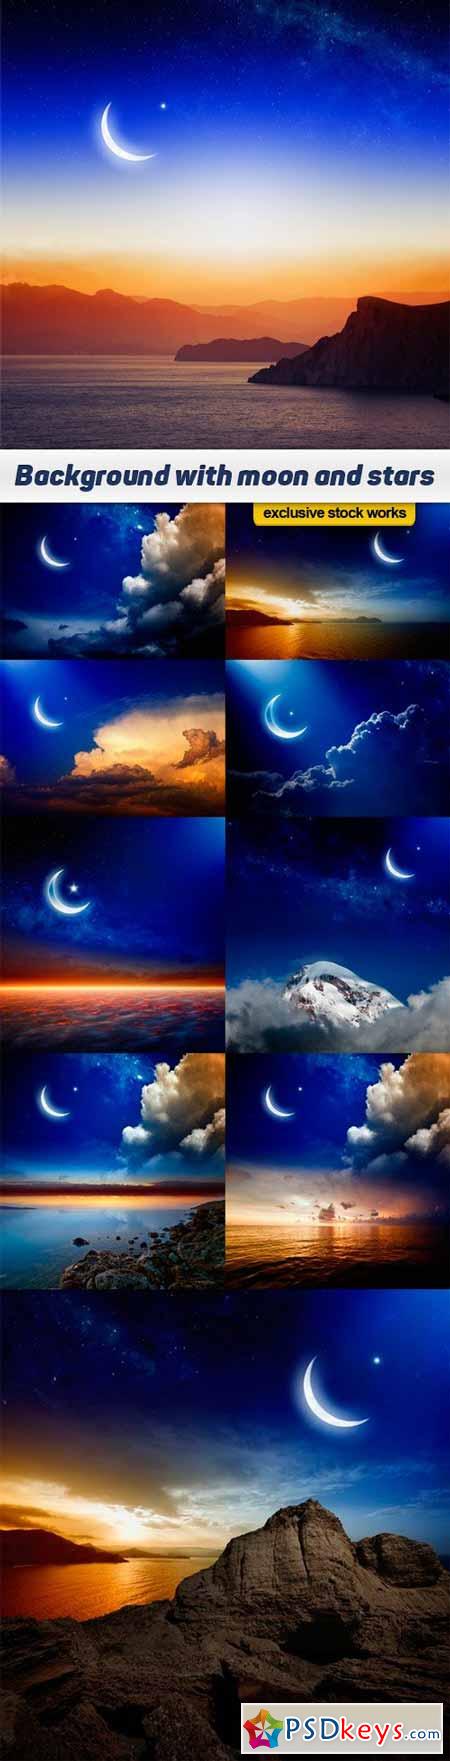 Background with moon and stars - 10 UHQ JPEG